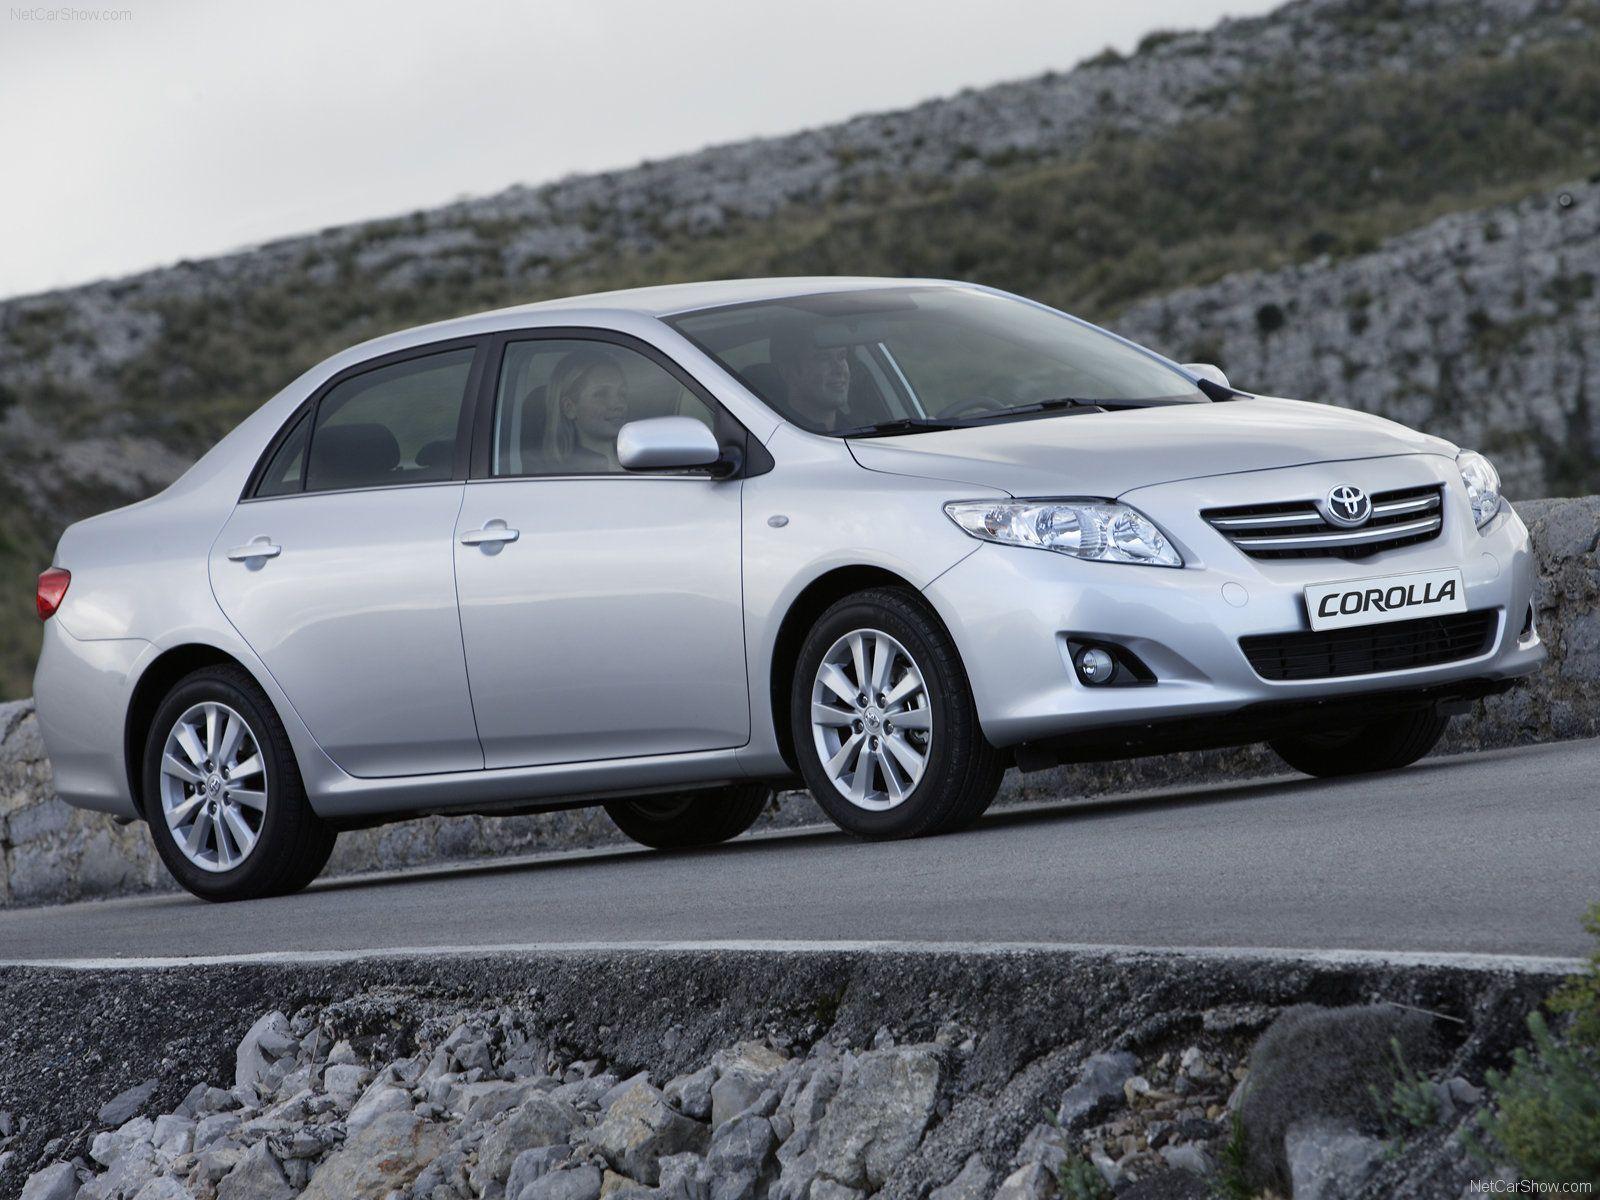 Reliable car Toyota Corolla wallpaper and image